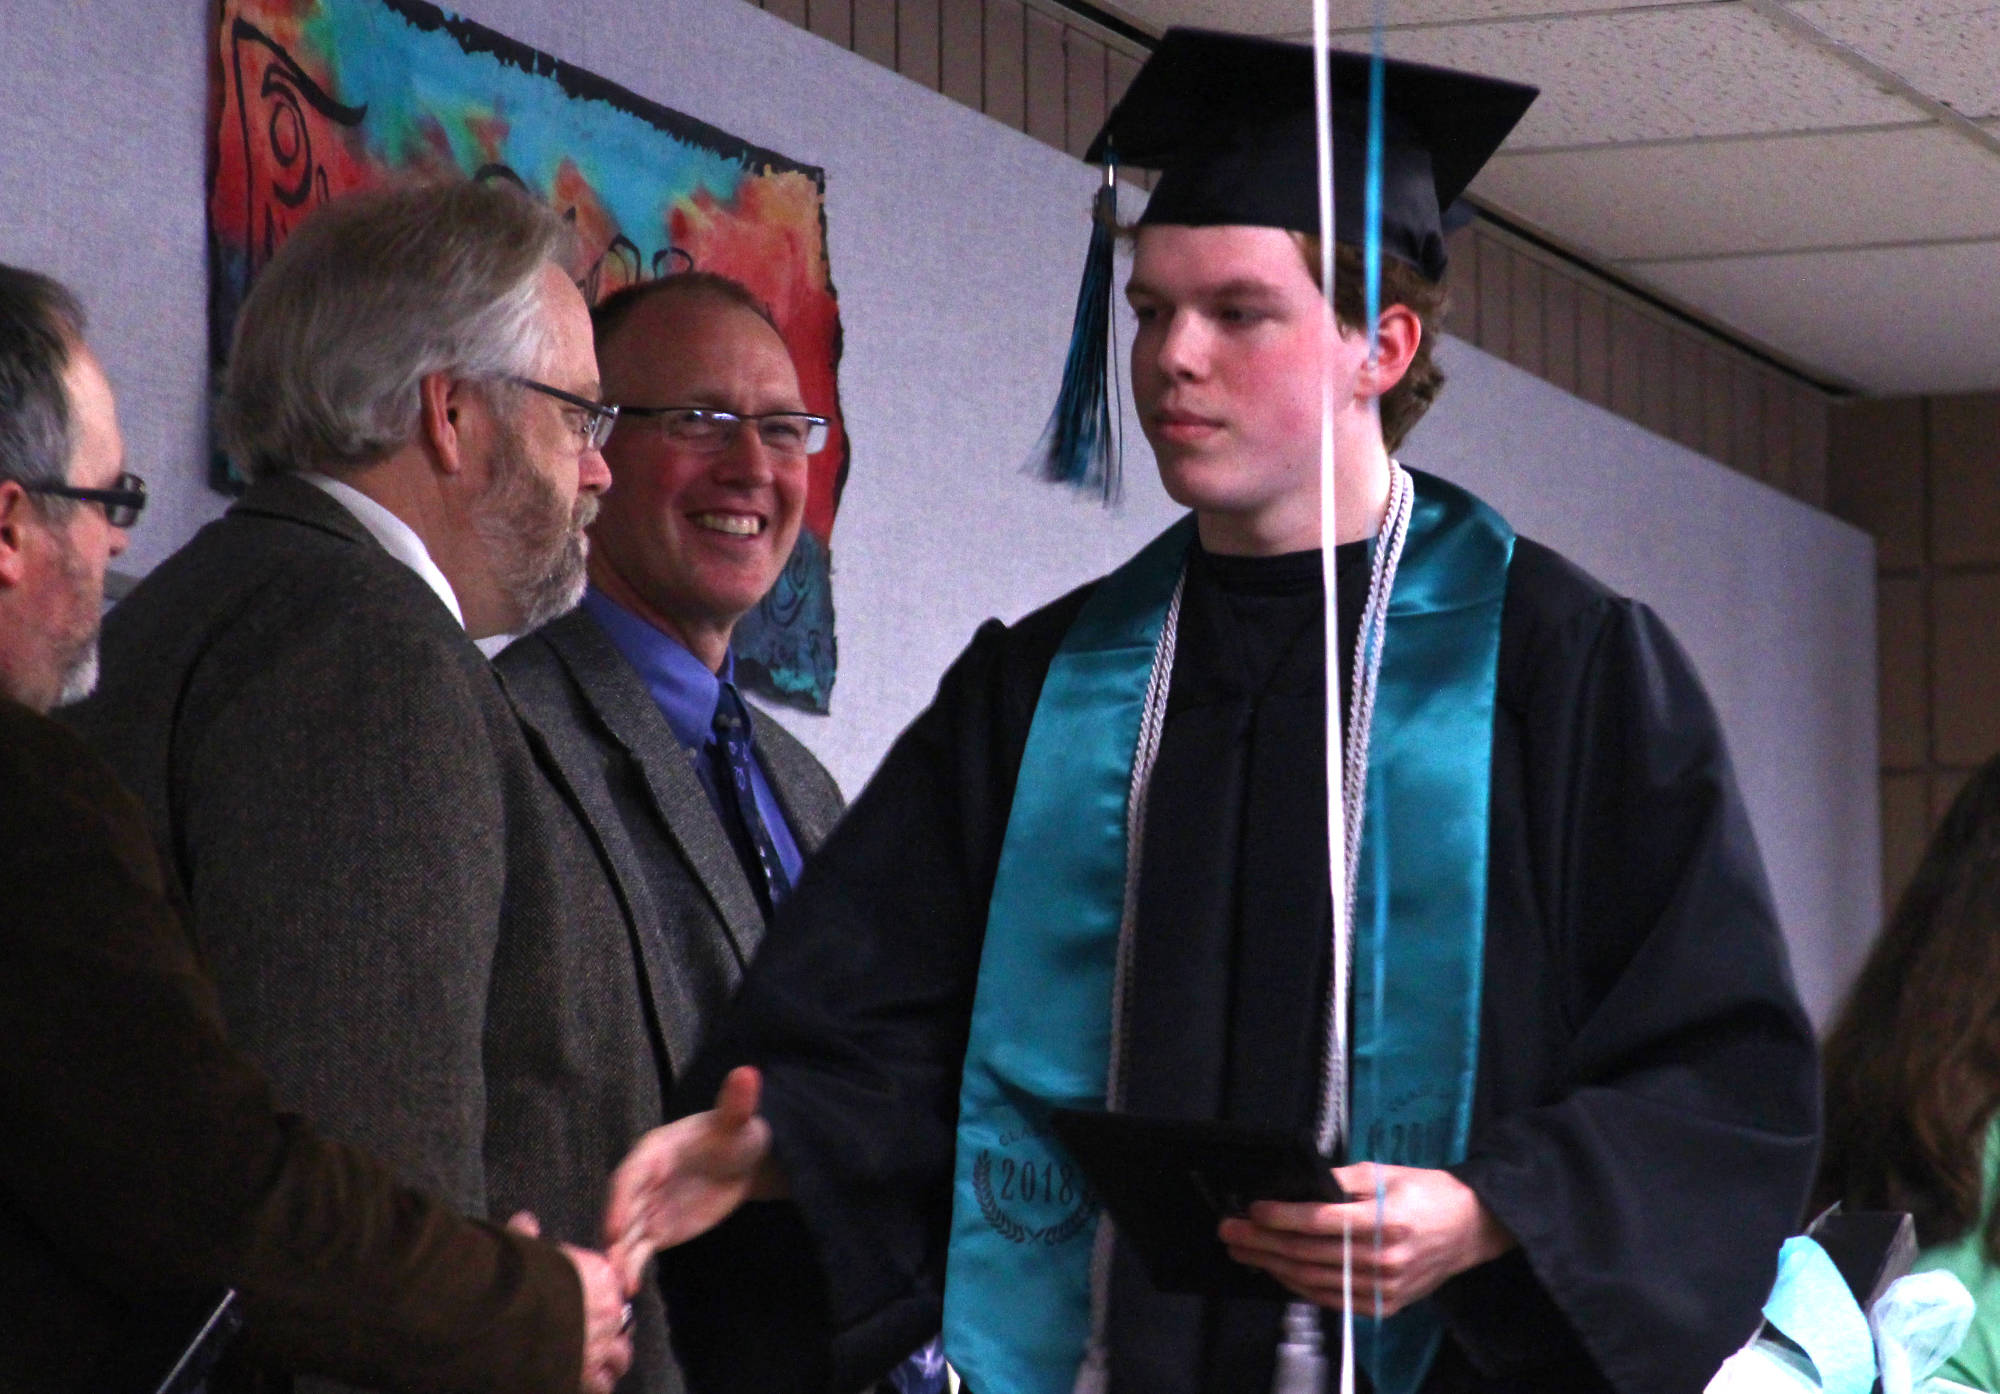 After accepting his diploma, River City Academy graduate Maxwell Mock shakes hands with Kenai Peninsula School Board member Marty Anderson during River City’s graduation ceremony at the Soldotna Regional Sports Complex on Monday, May 21, 2018 in Soldotna, Alaska. (Ben Boettger/Peninsula Clarion).